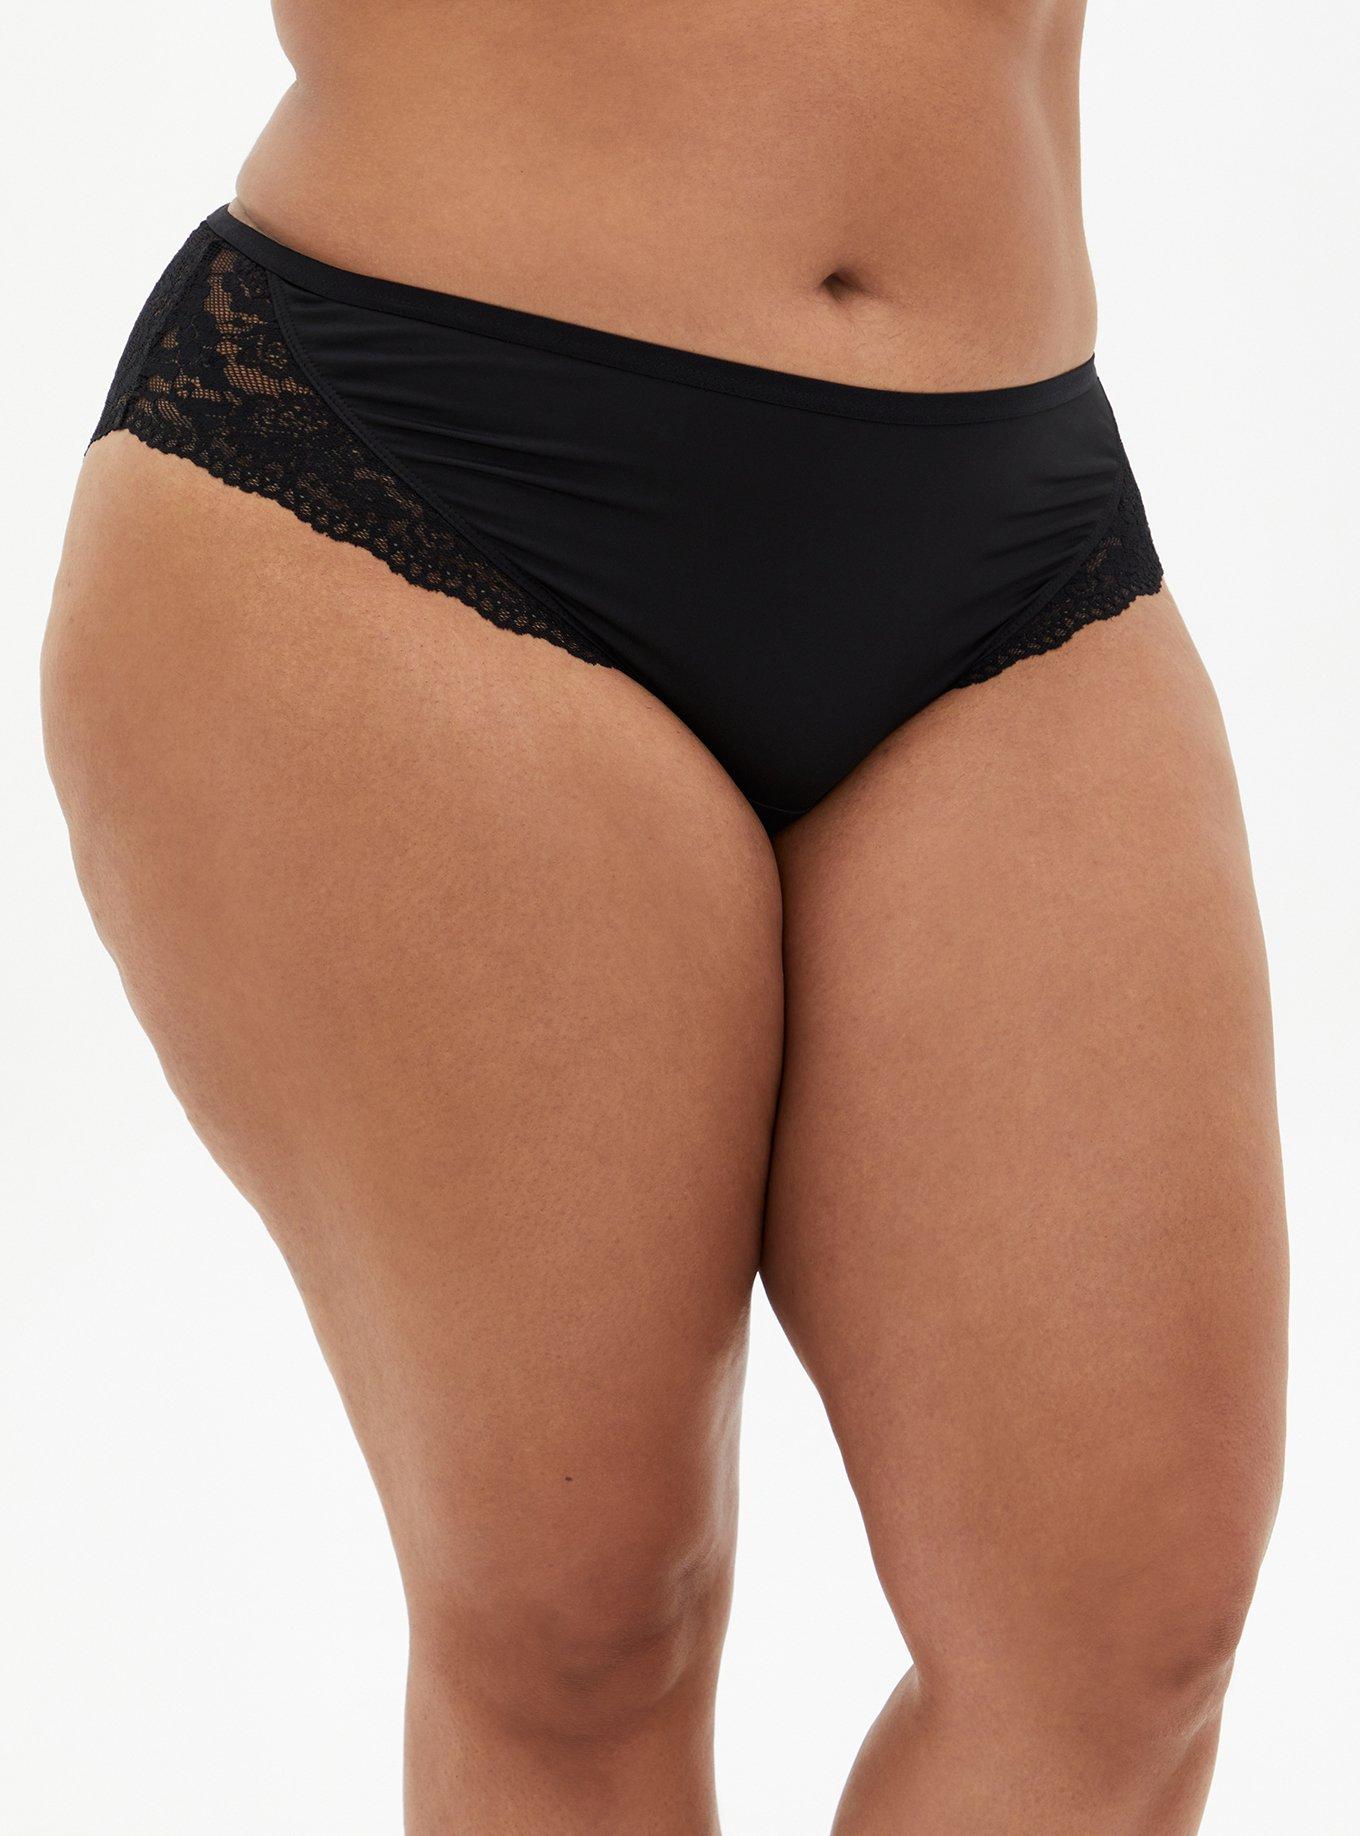 Women's lace briefs sexy panties with cage back Brazil